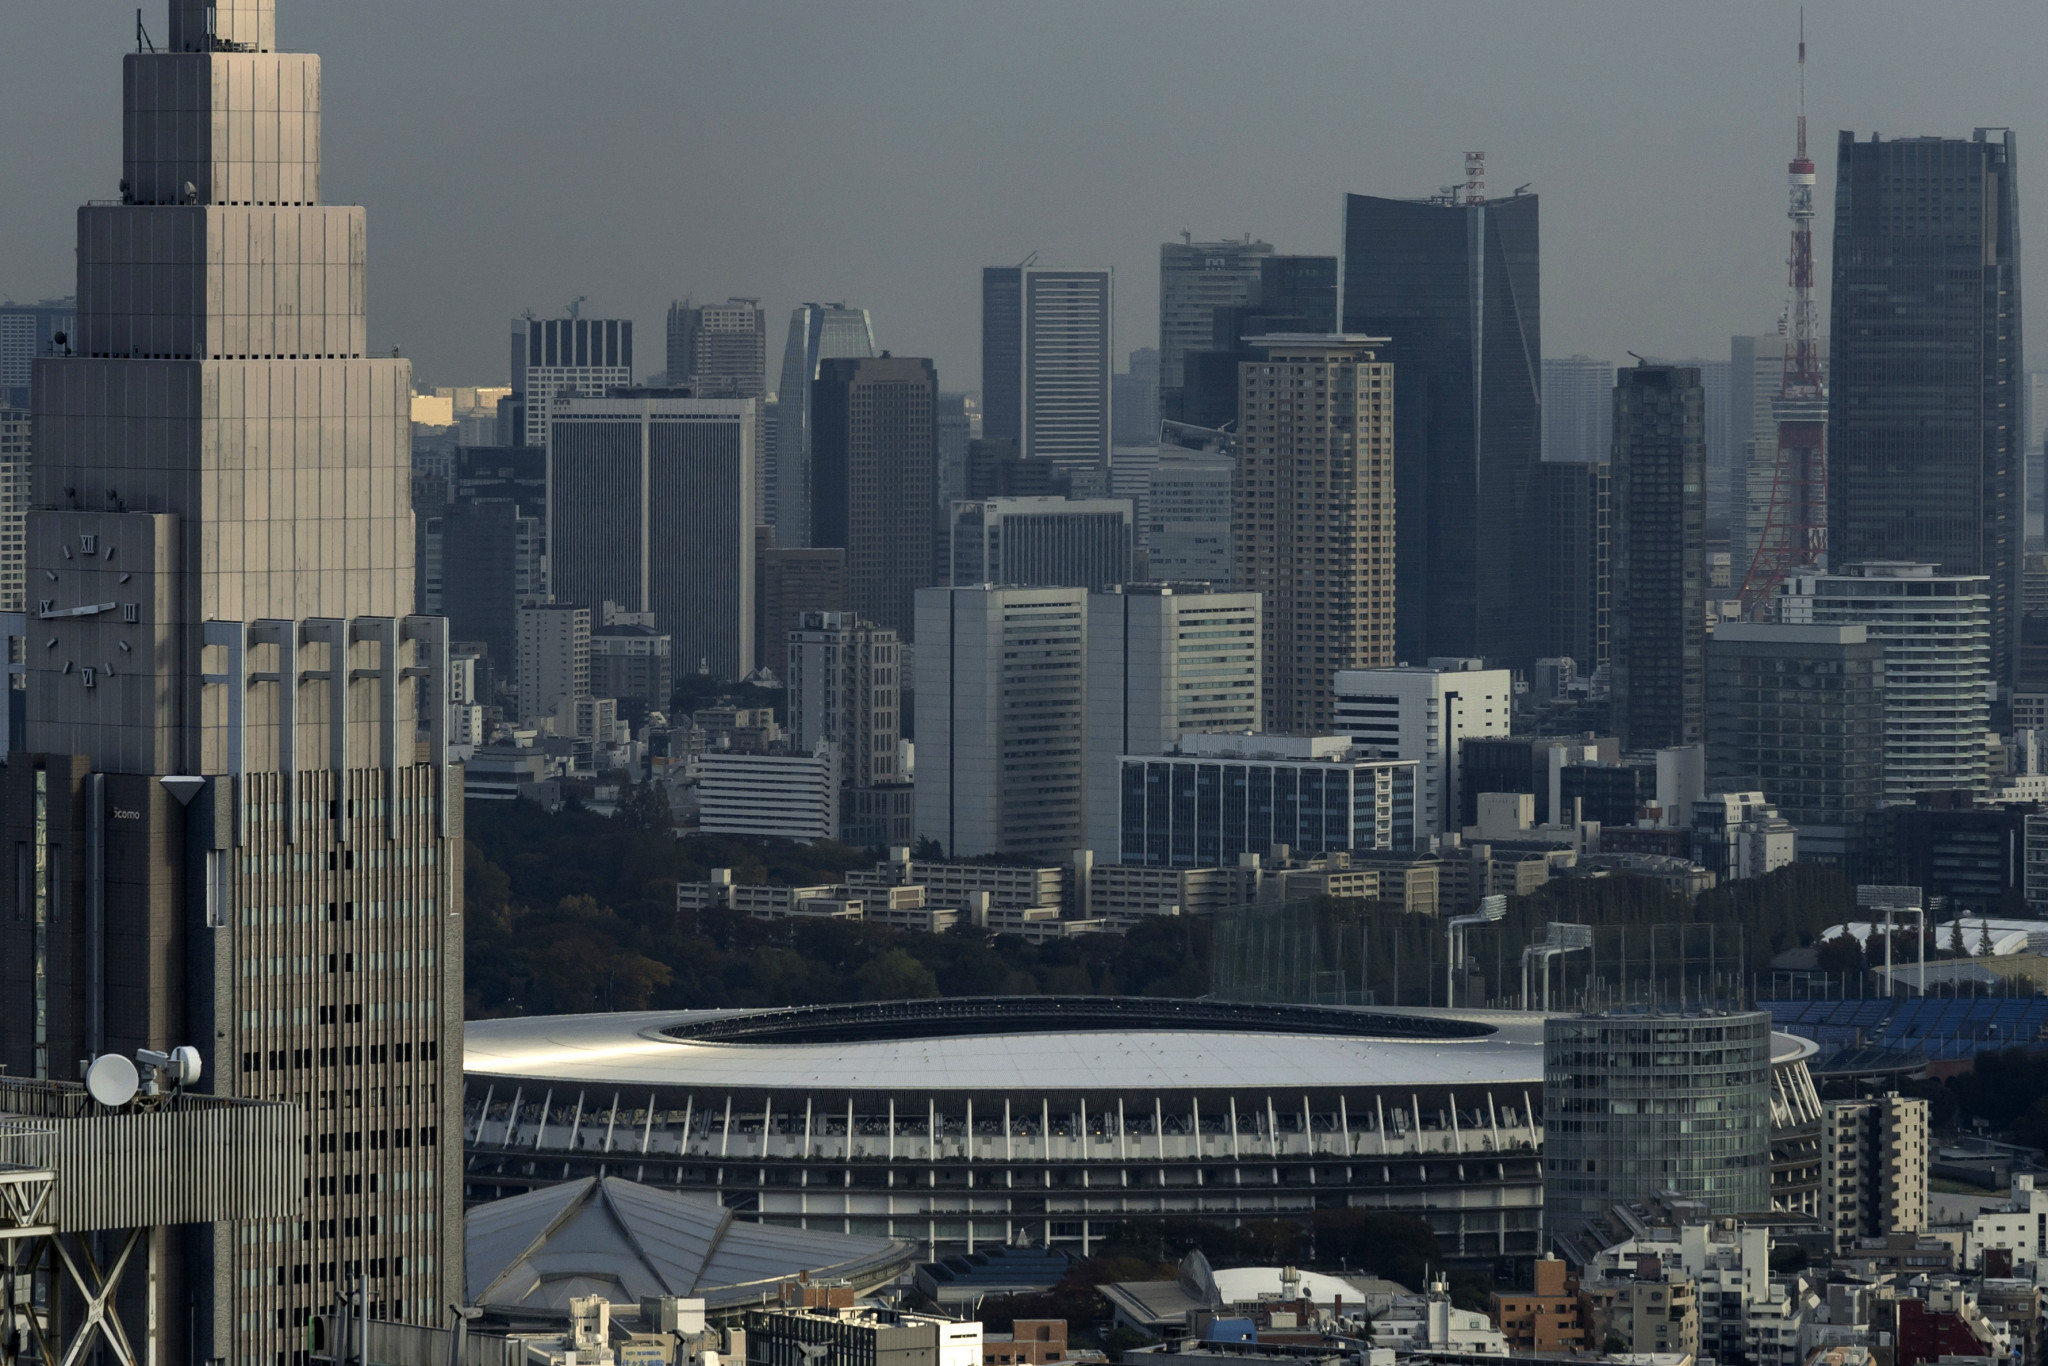 Tokyo 2020 have now secured 66 domestic partners prior to the Olympic and Paralympic Games ©Getty Images